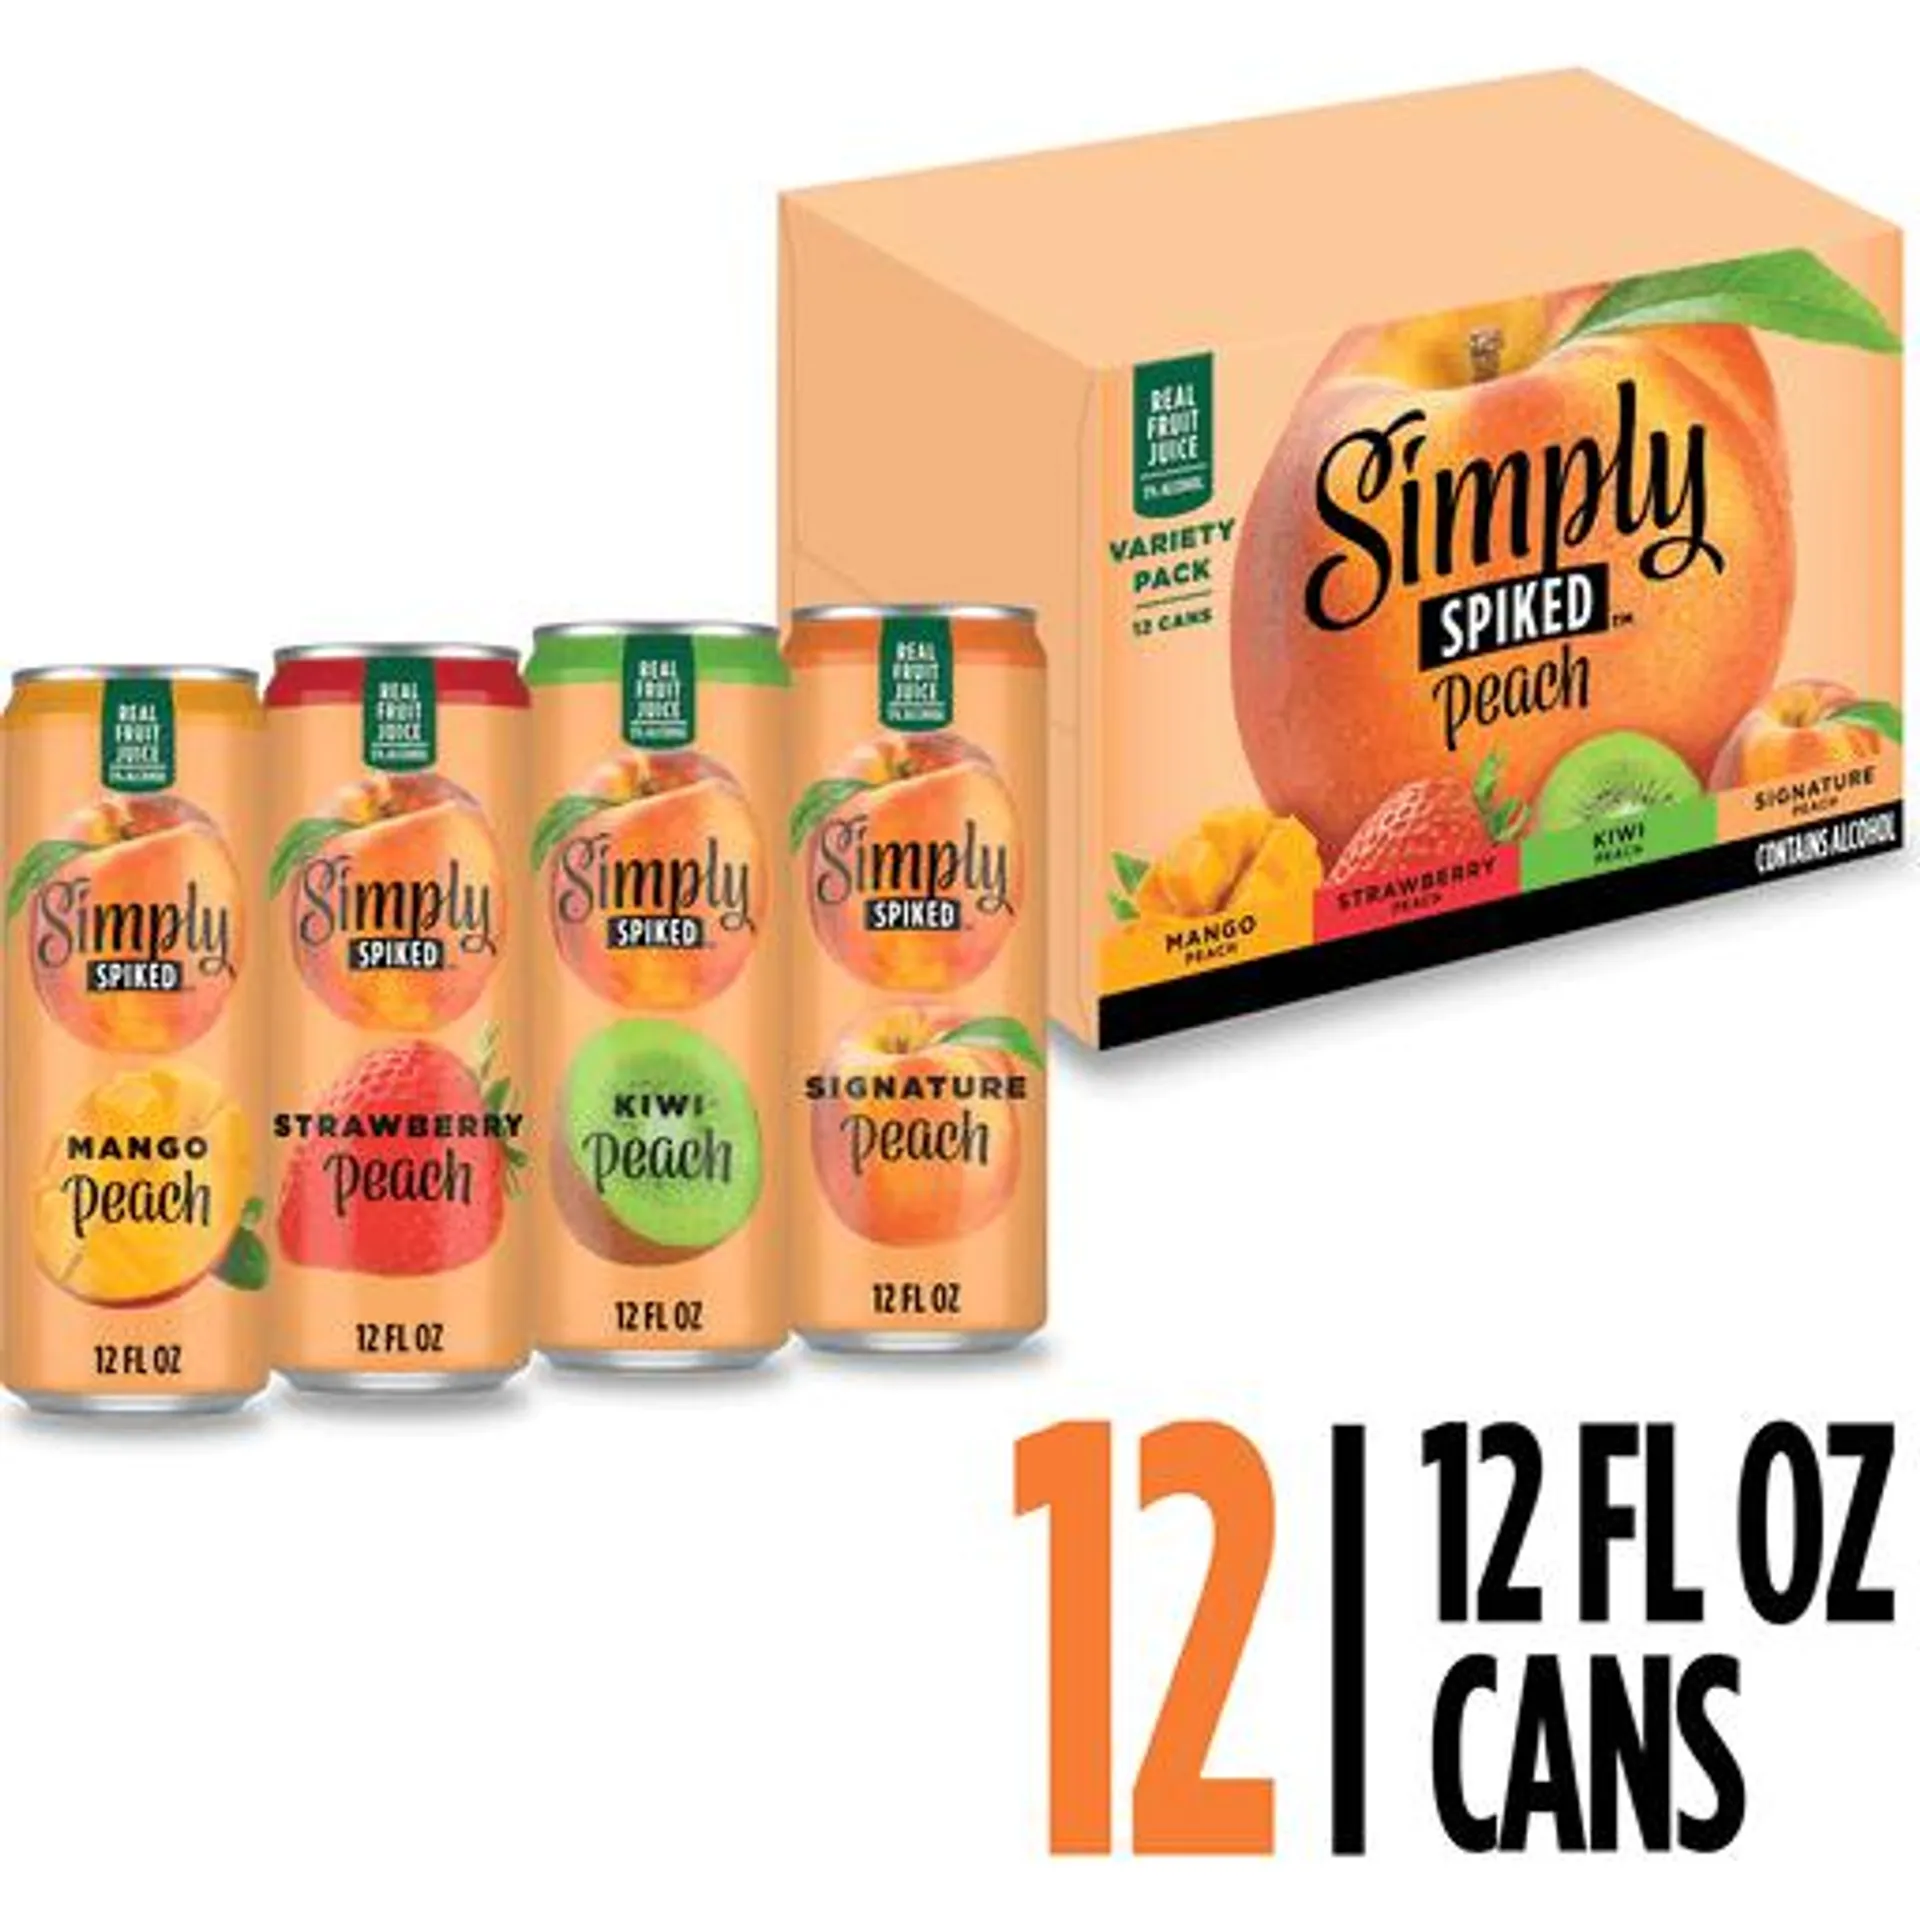 Simply Spiked Beer, Peach, Variety Pack, 12 count